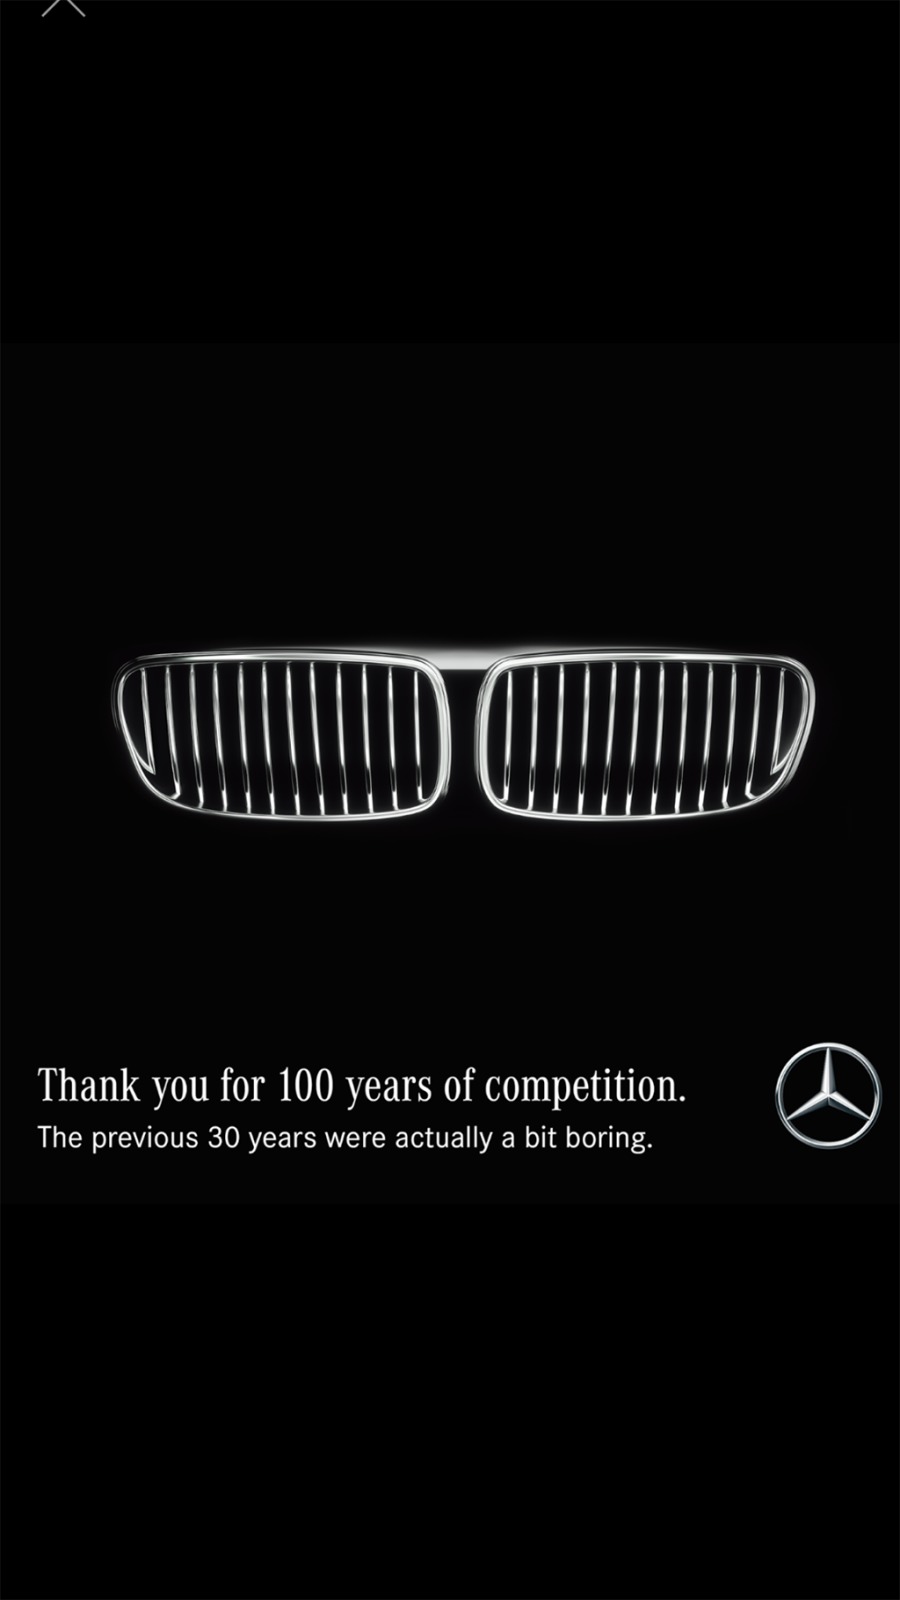 7 N\

 

Thank you for 100 years of competition. oN

The previous 30 years were actually a bit boring.